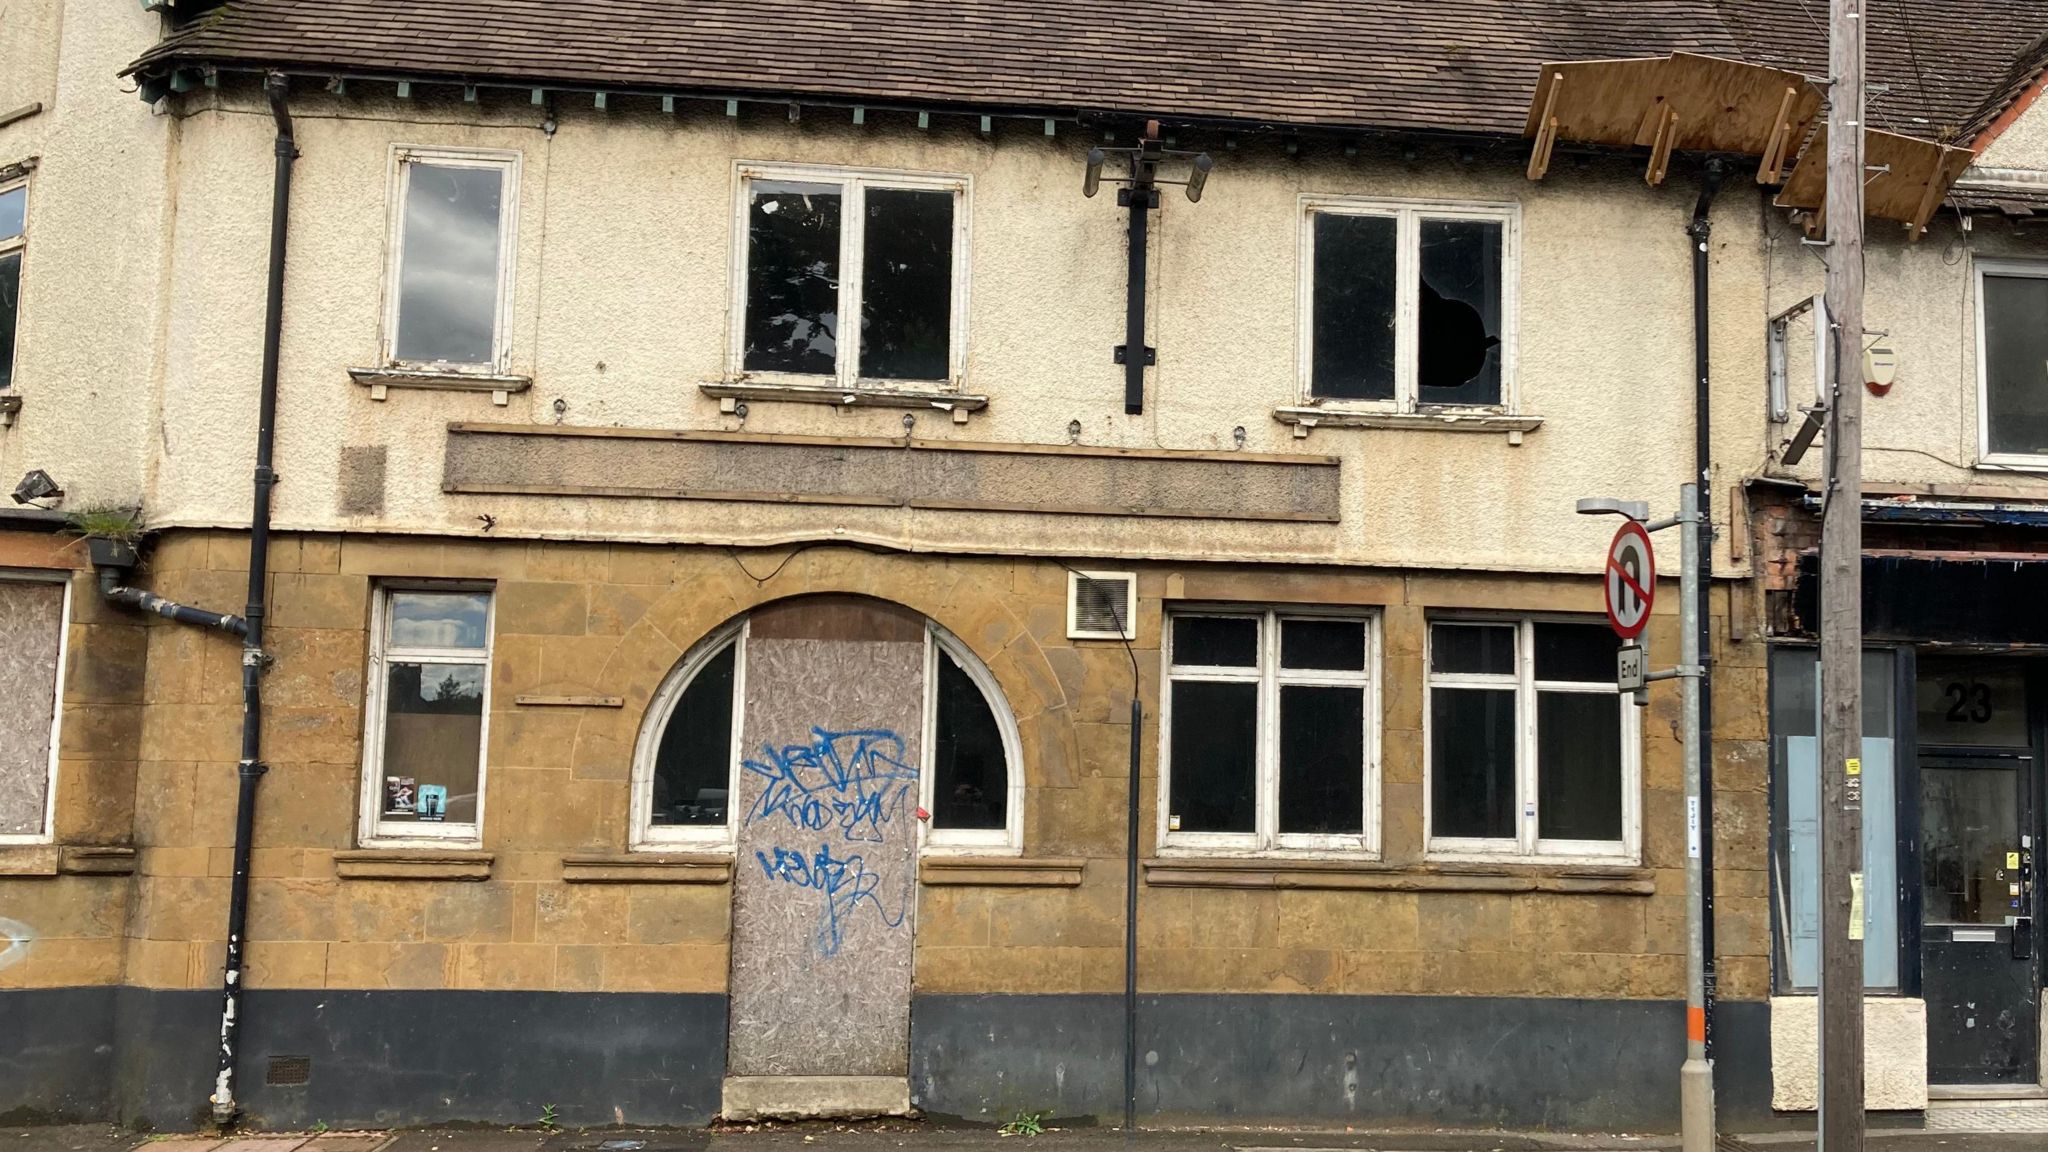 One facade of pub showing boarded up door with graffiti